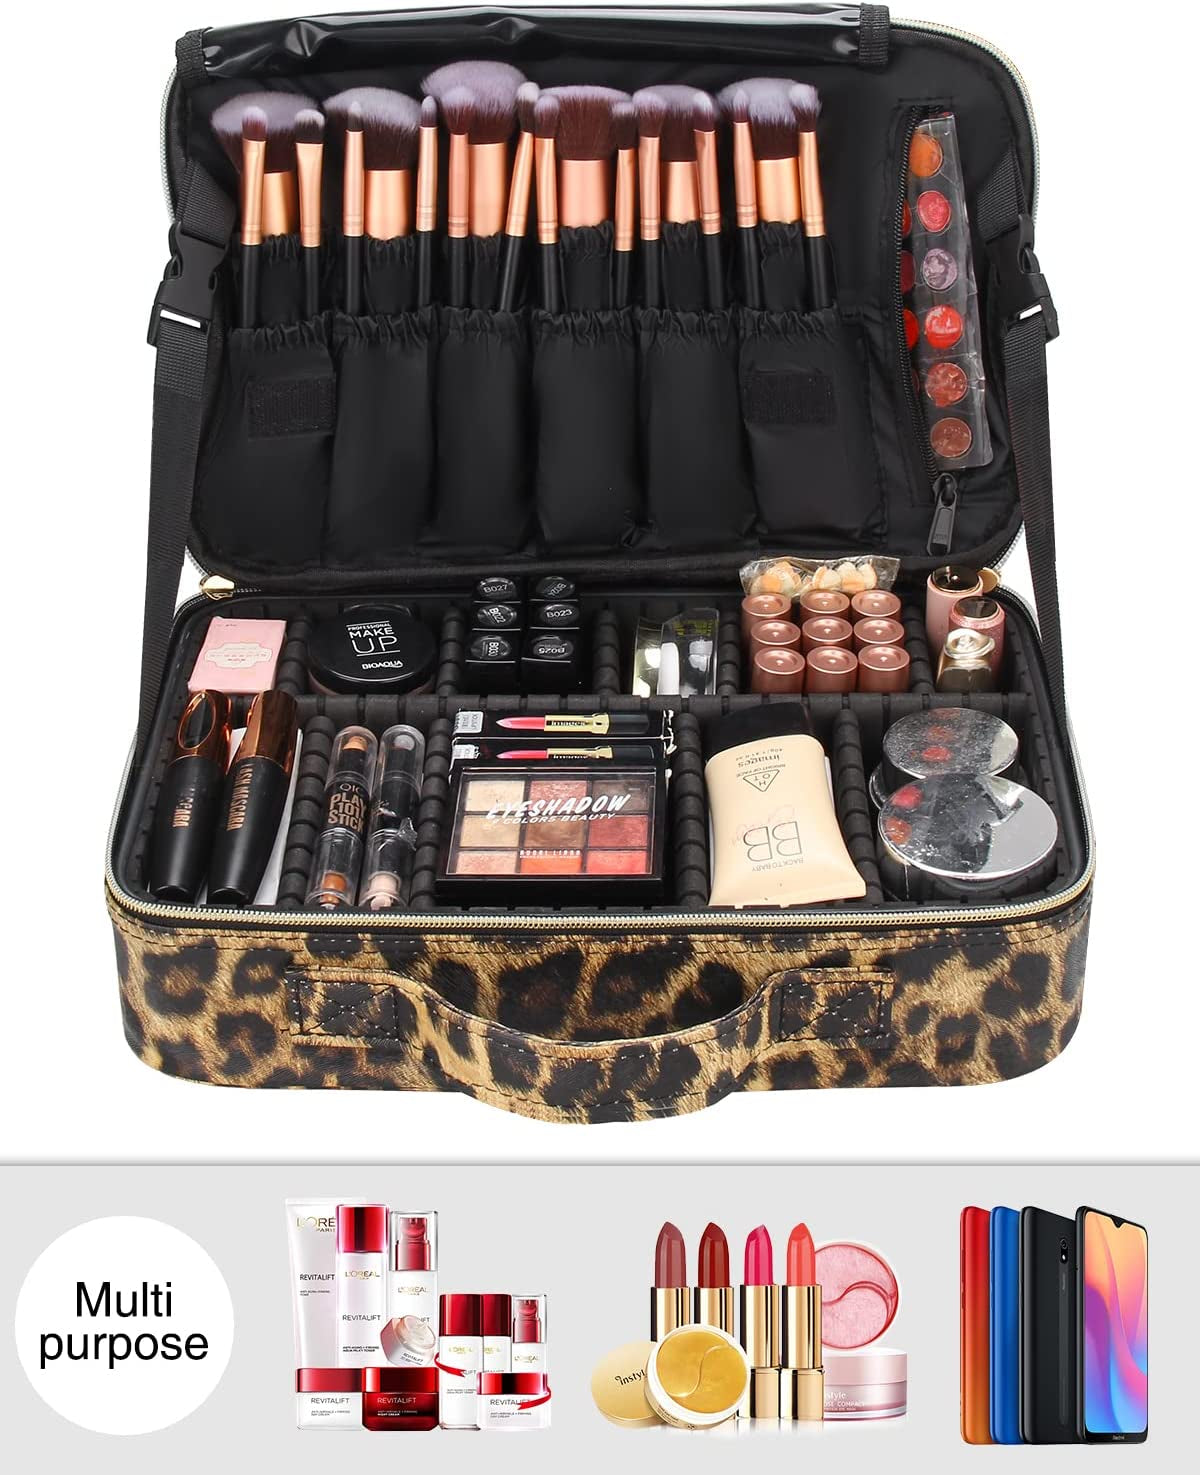 Makeup Train Case Travel Makeup Bag for Women Cosmetic, Relavel Professional Makeup Organizer Bags Make up Artist Storage Box, Portable Makeup Brush Holder with Adjustable Dividers and Strap